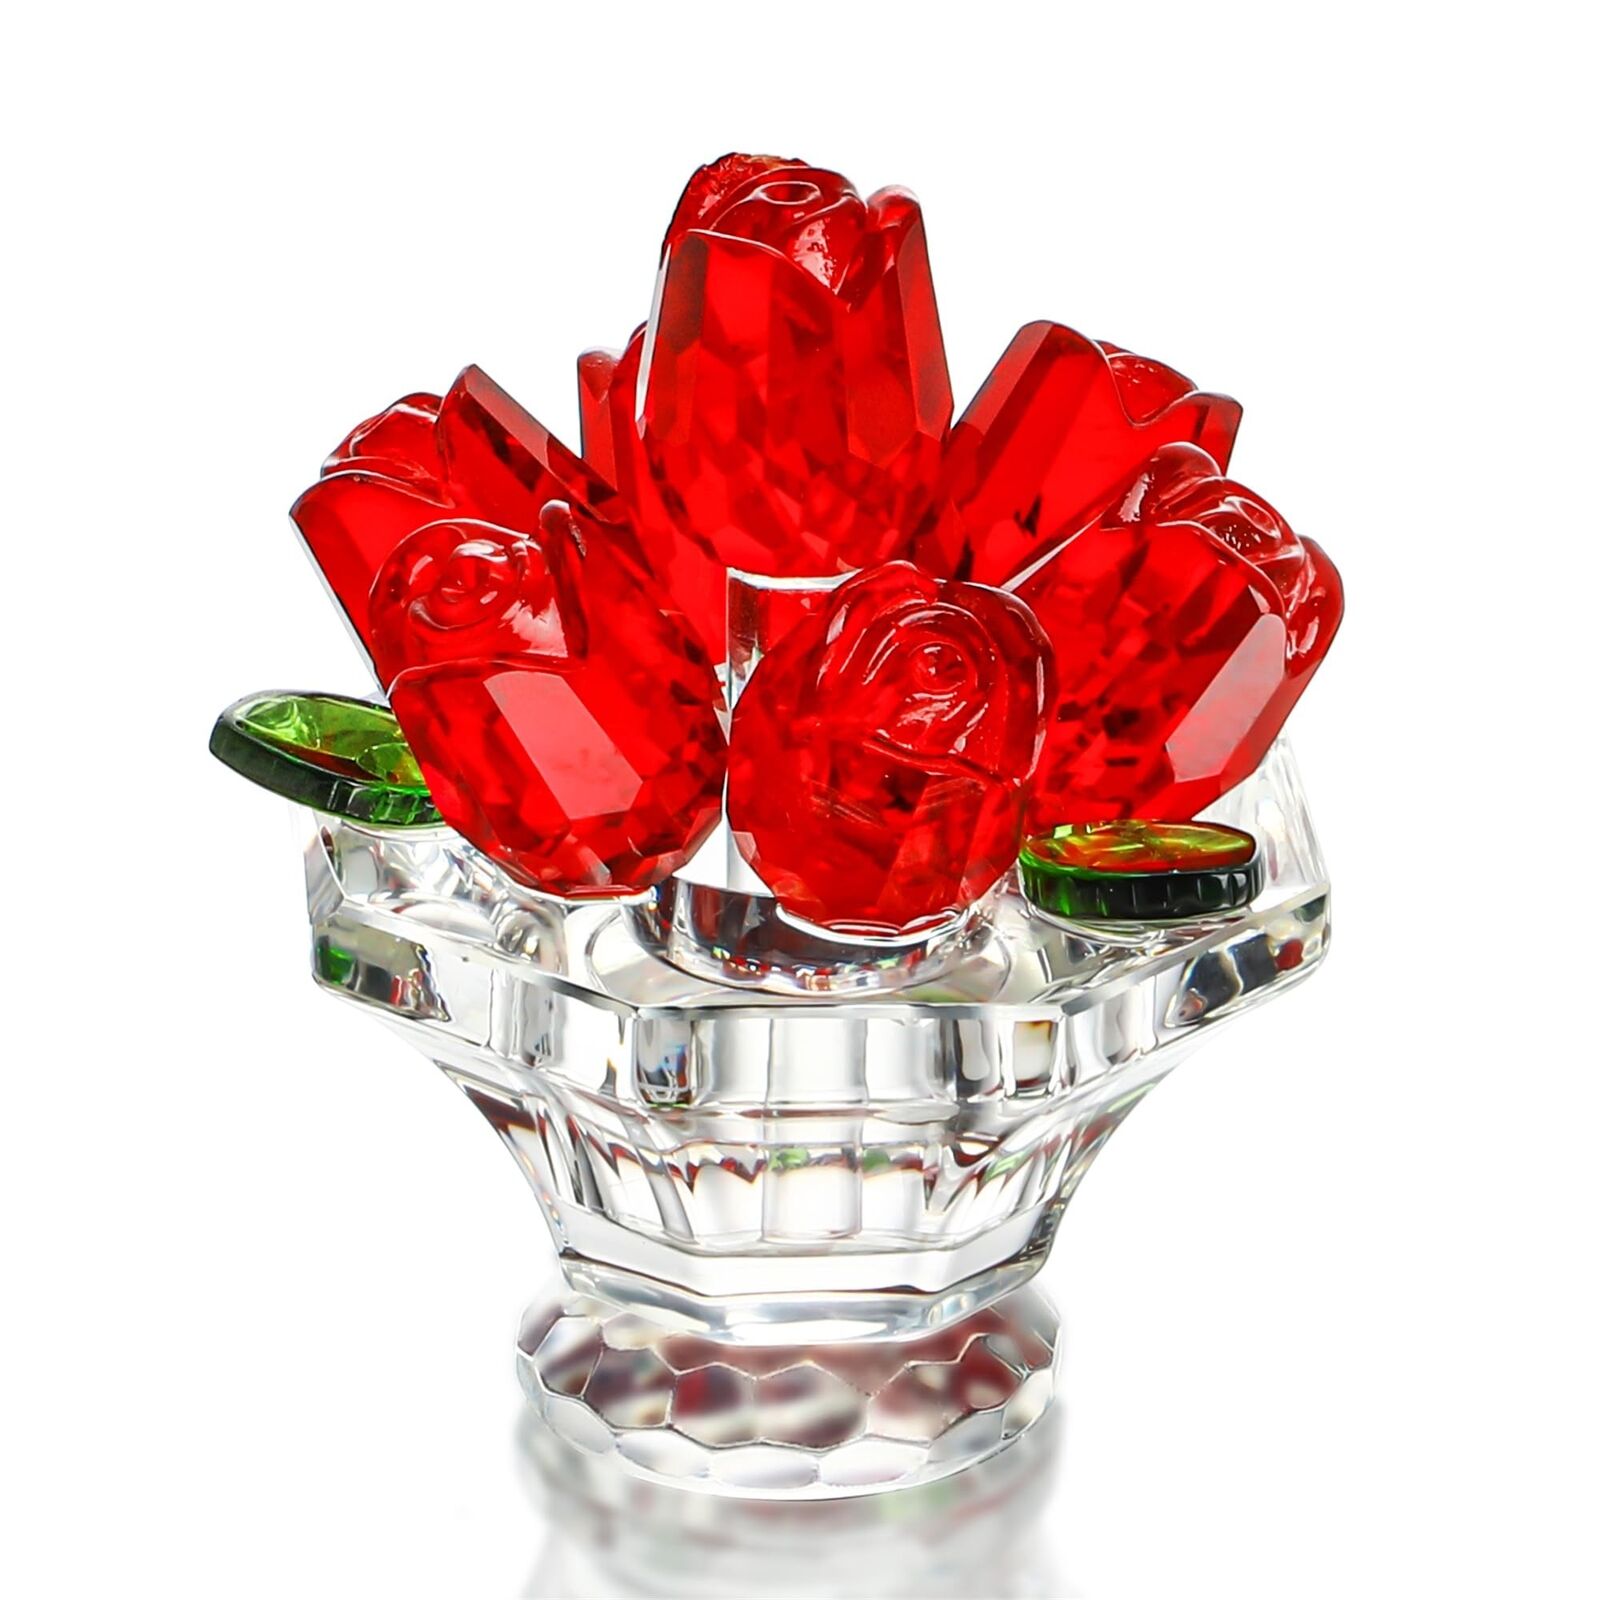 Red Crystal Rose Figurine Rose Gifts Birthday Women Crystal Glass Bouquet Orname